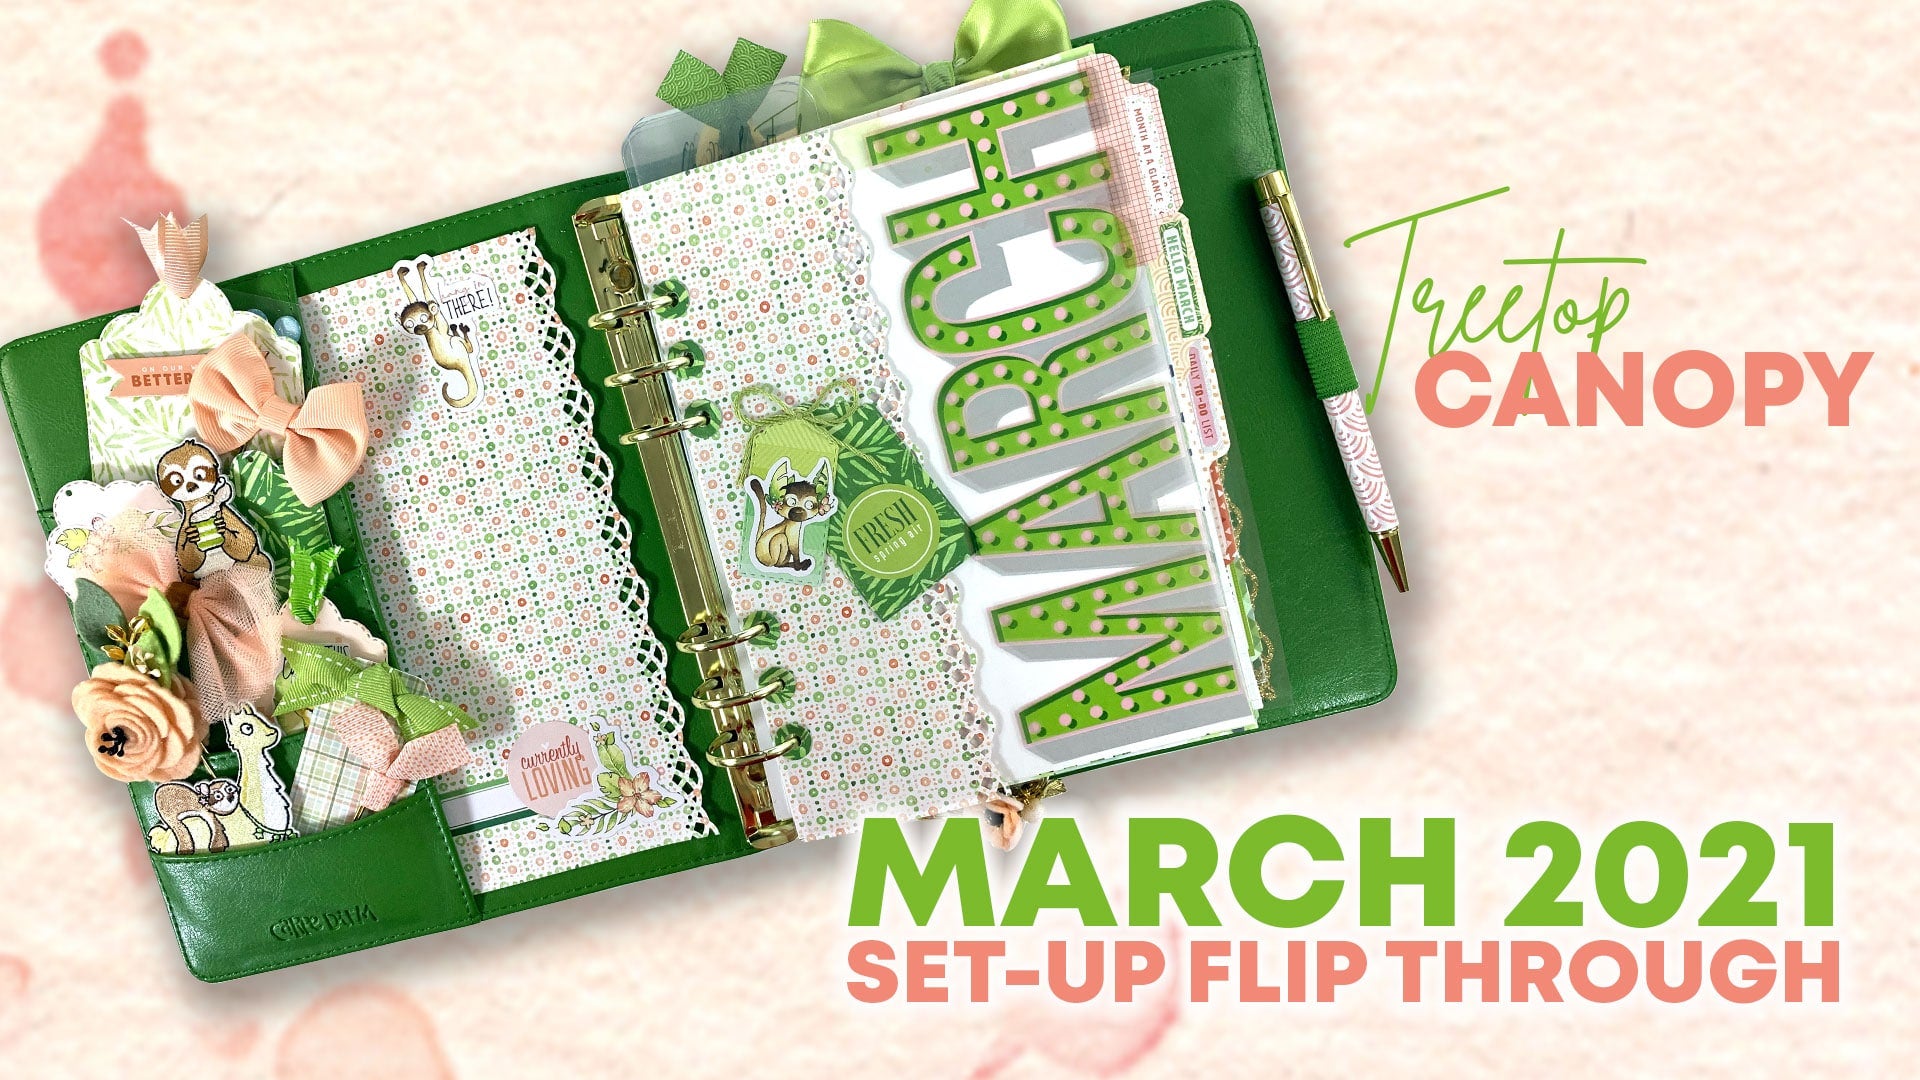 Treetop Canopy March 2021 Planner Set-Up